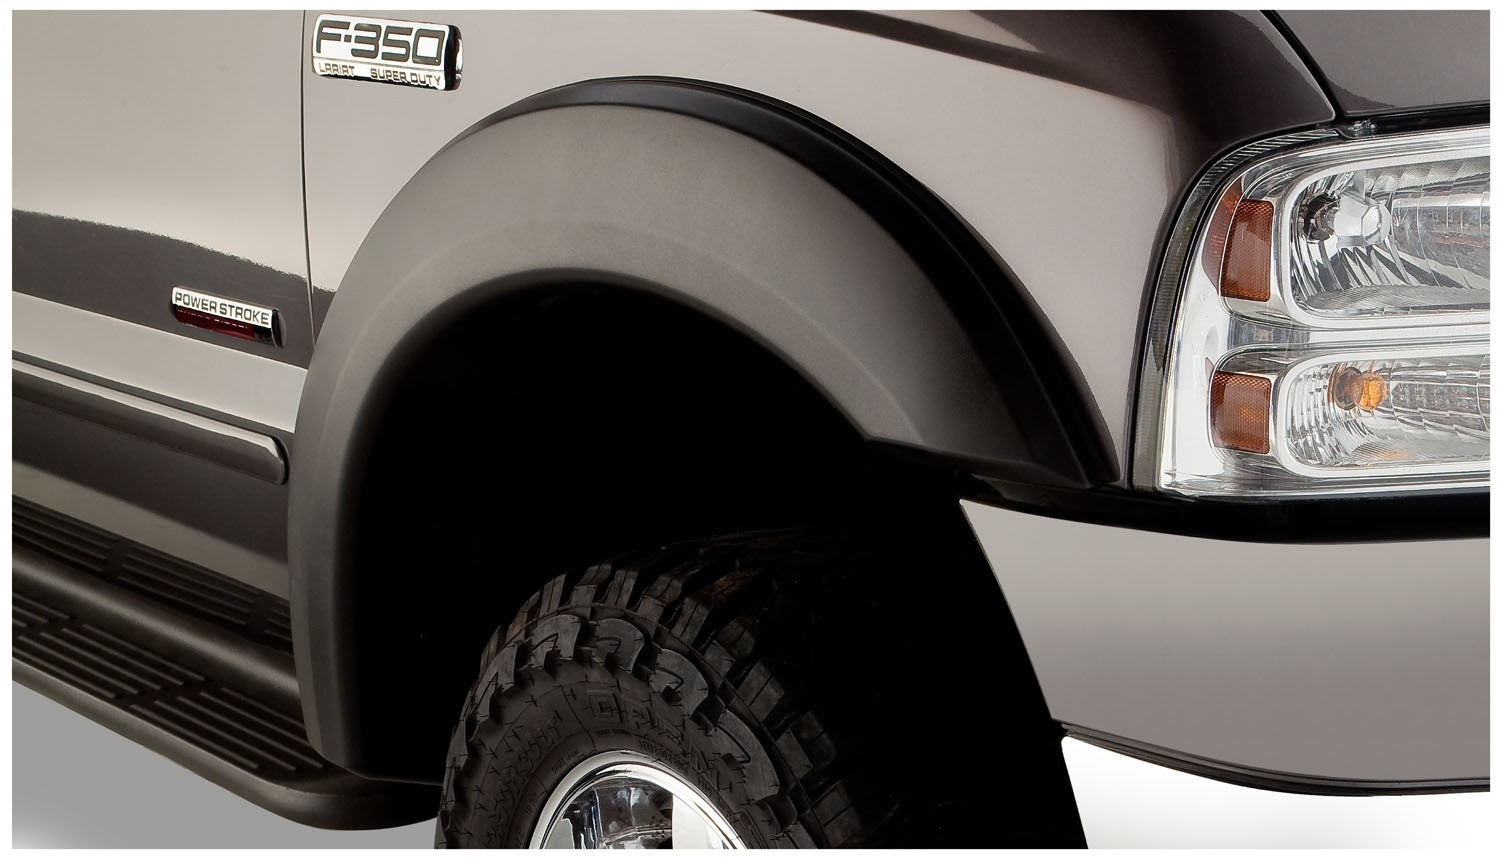 Bushwacker 20075-02 Black Extend-A-Fender Style Smooth Finish Front Fender Flares for 1999-2007 Ford F-250 to F-550 Super Duty